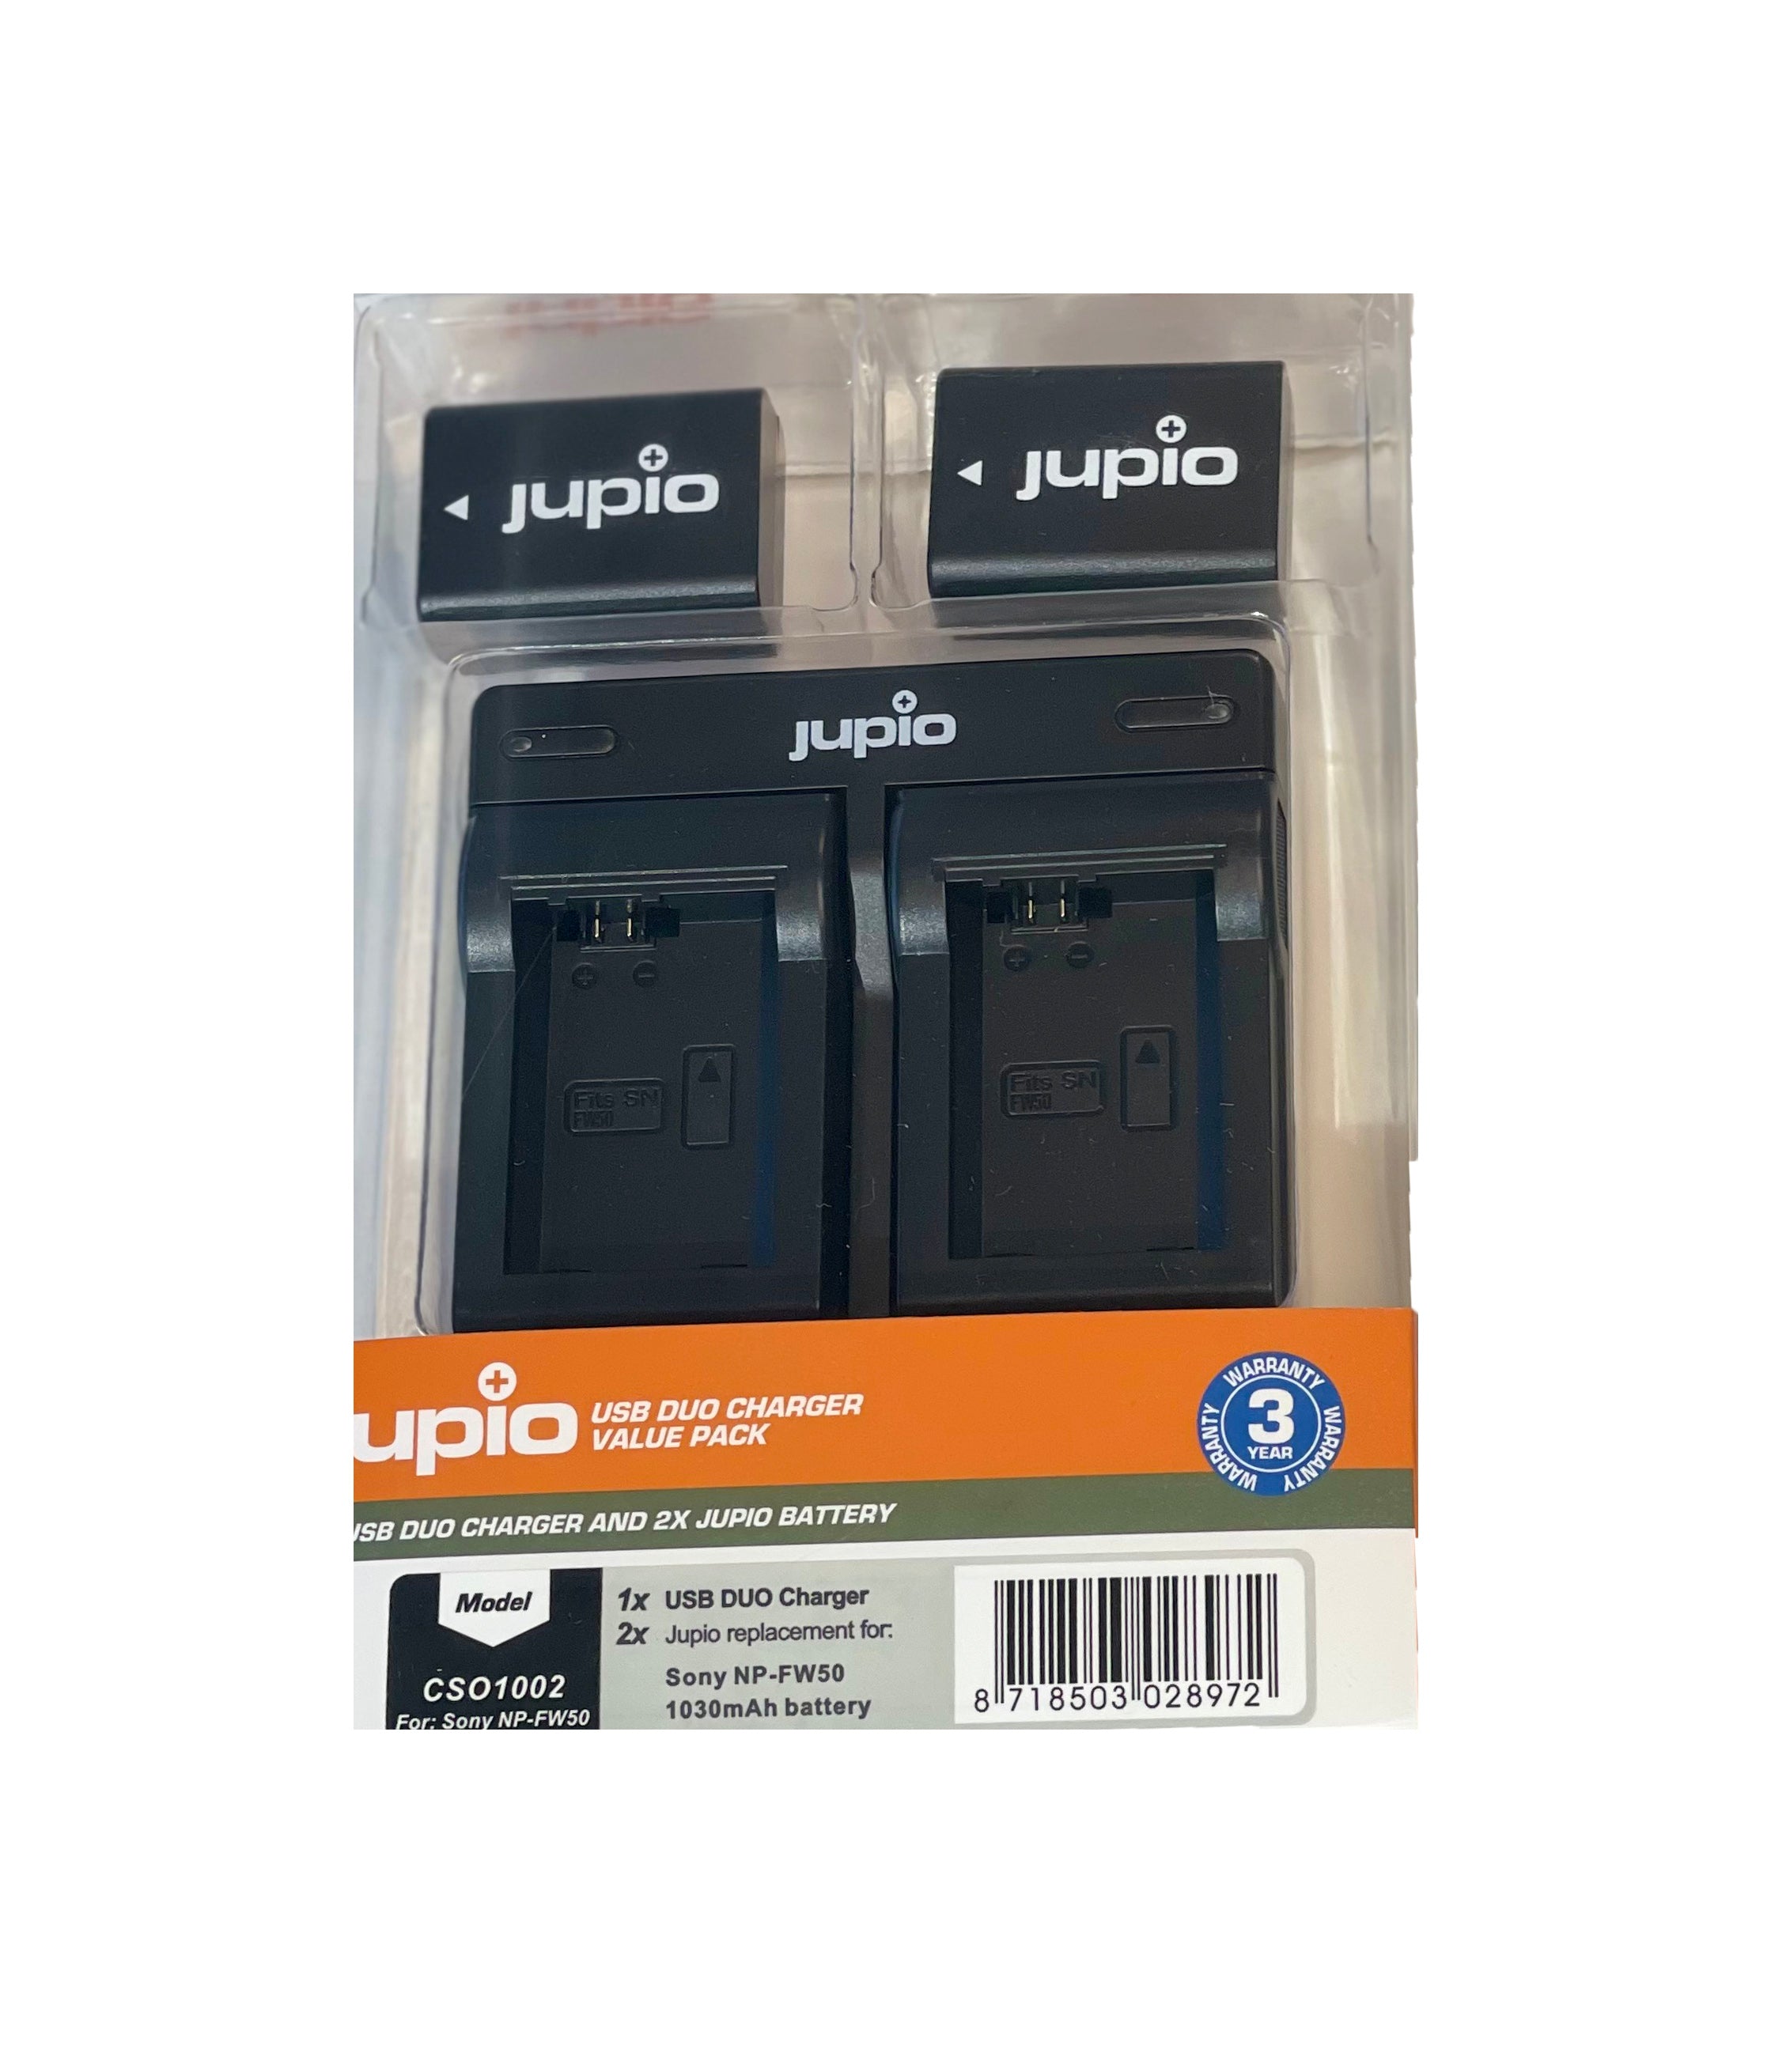 Jupio Battery Charger Kit Dual 2X Np-Fw50 1030Mah For Sony Digital Cameras